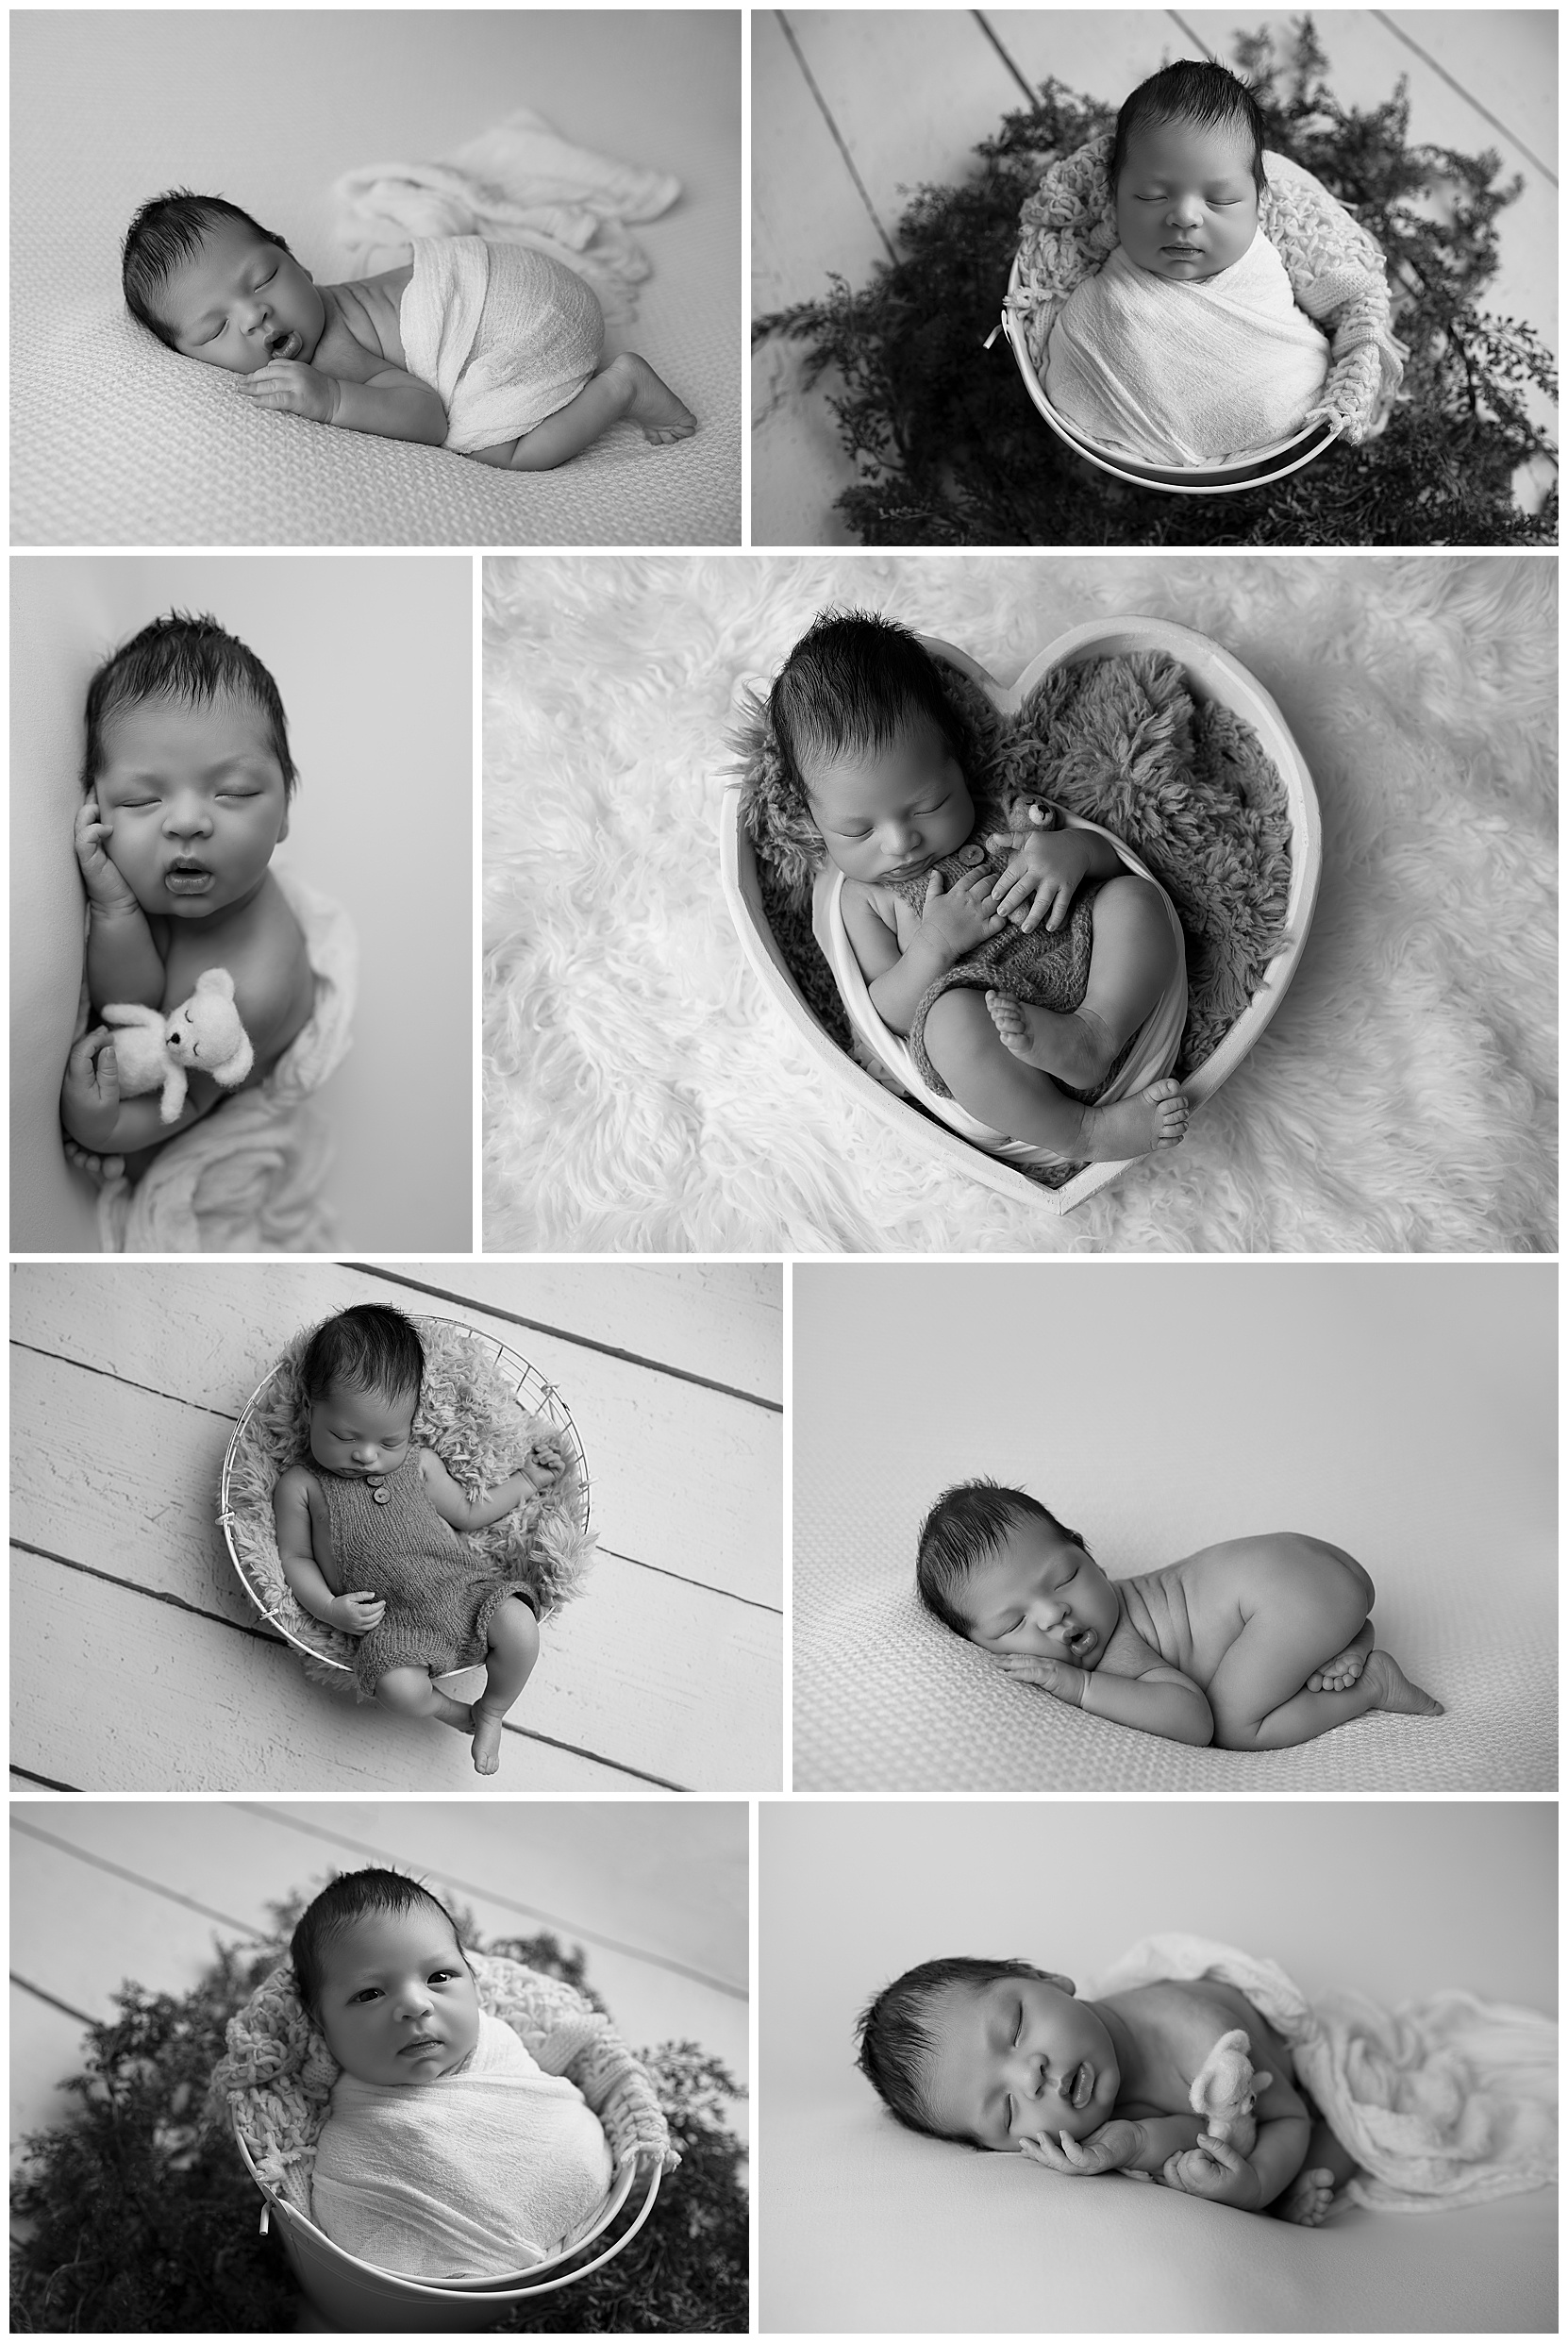 collage of photos of a sleeping baby boy in black/white pictures